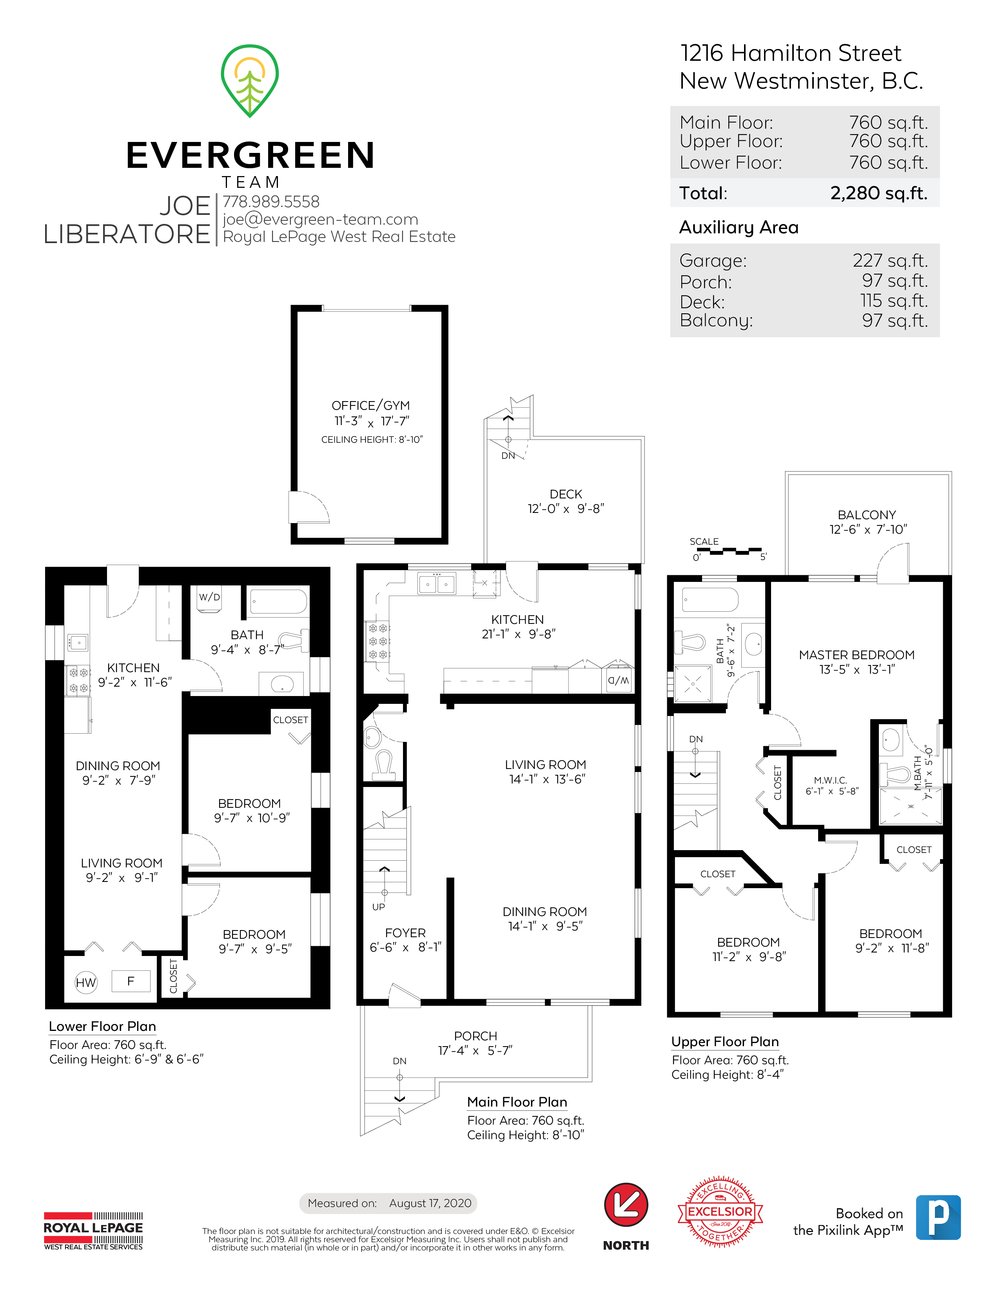 Floor Plan for a 5 Bedroom House in 